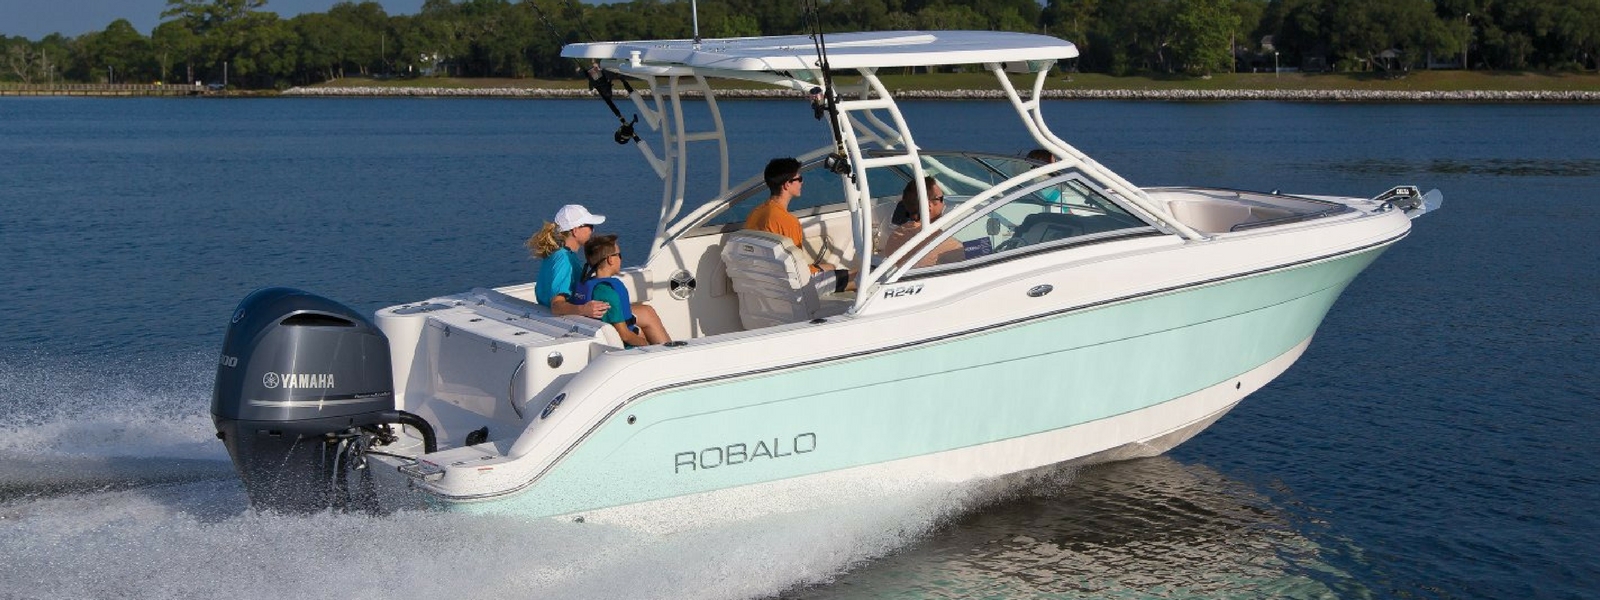 Robalo Boats For Sale In Ohio